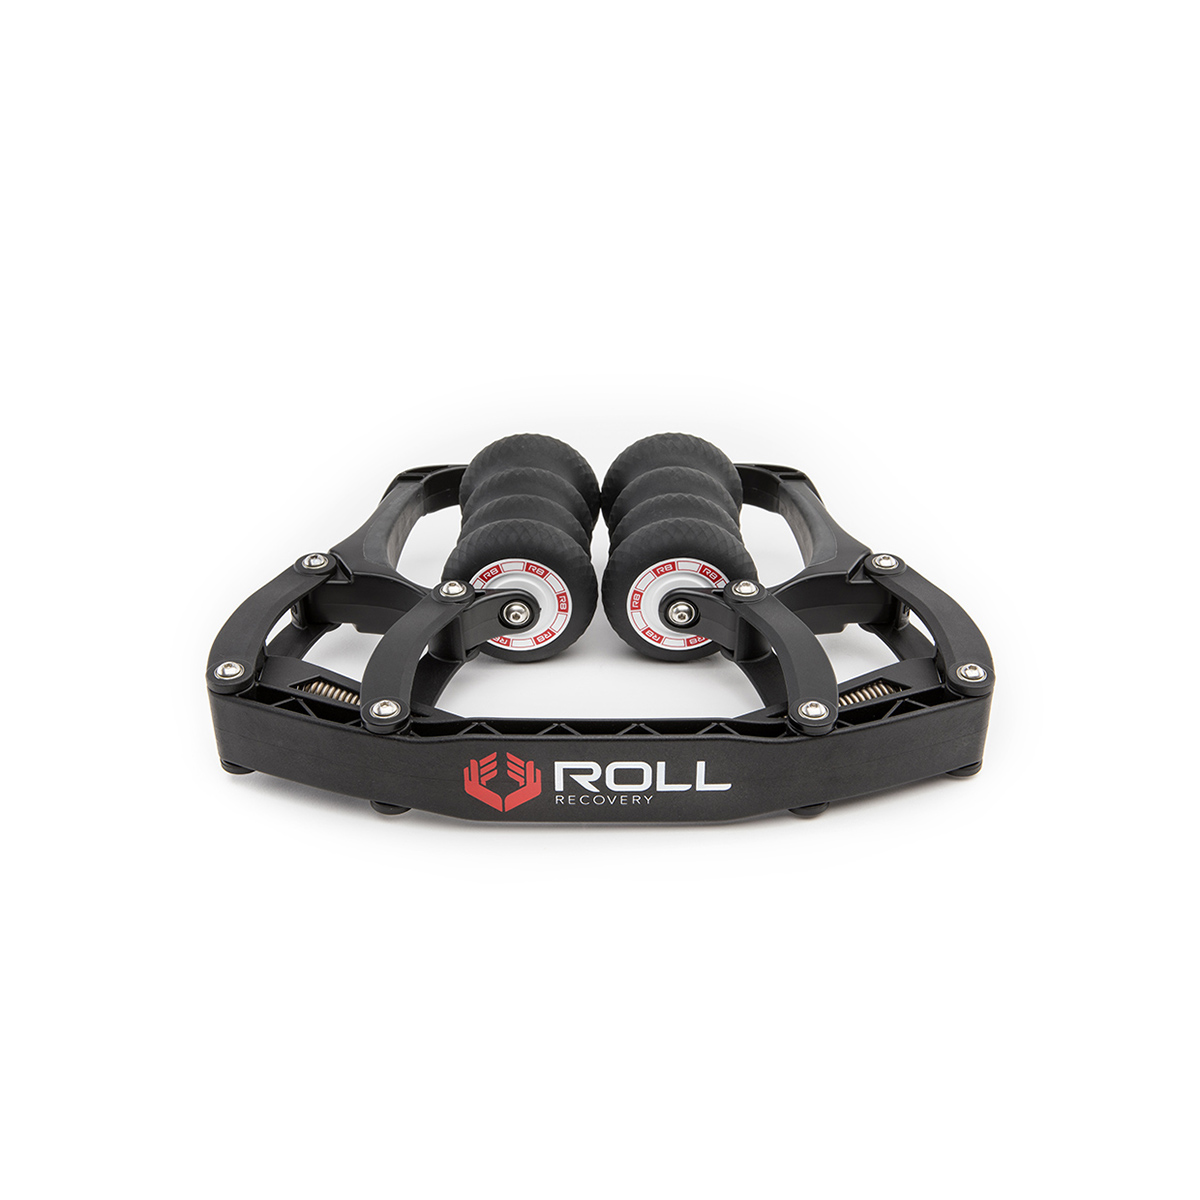 Roll Recovery R8, , large image number null